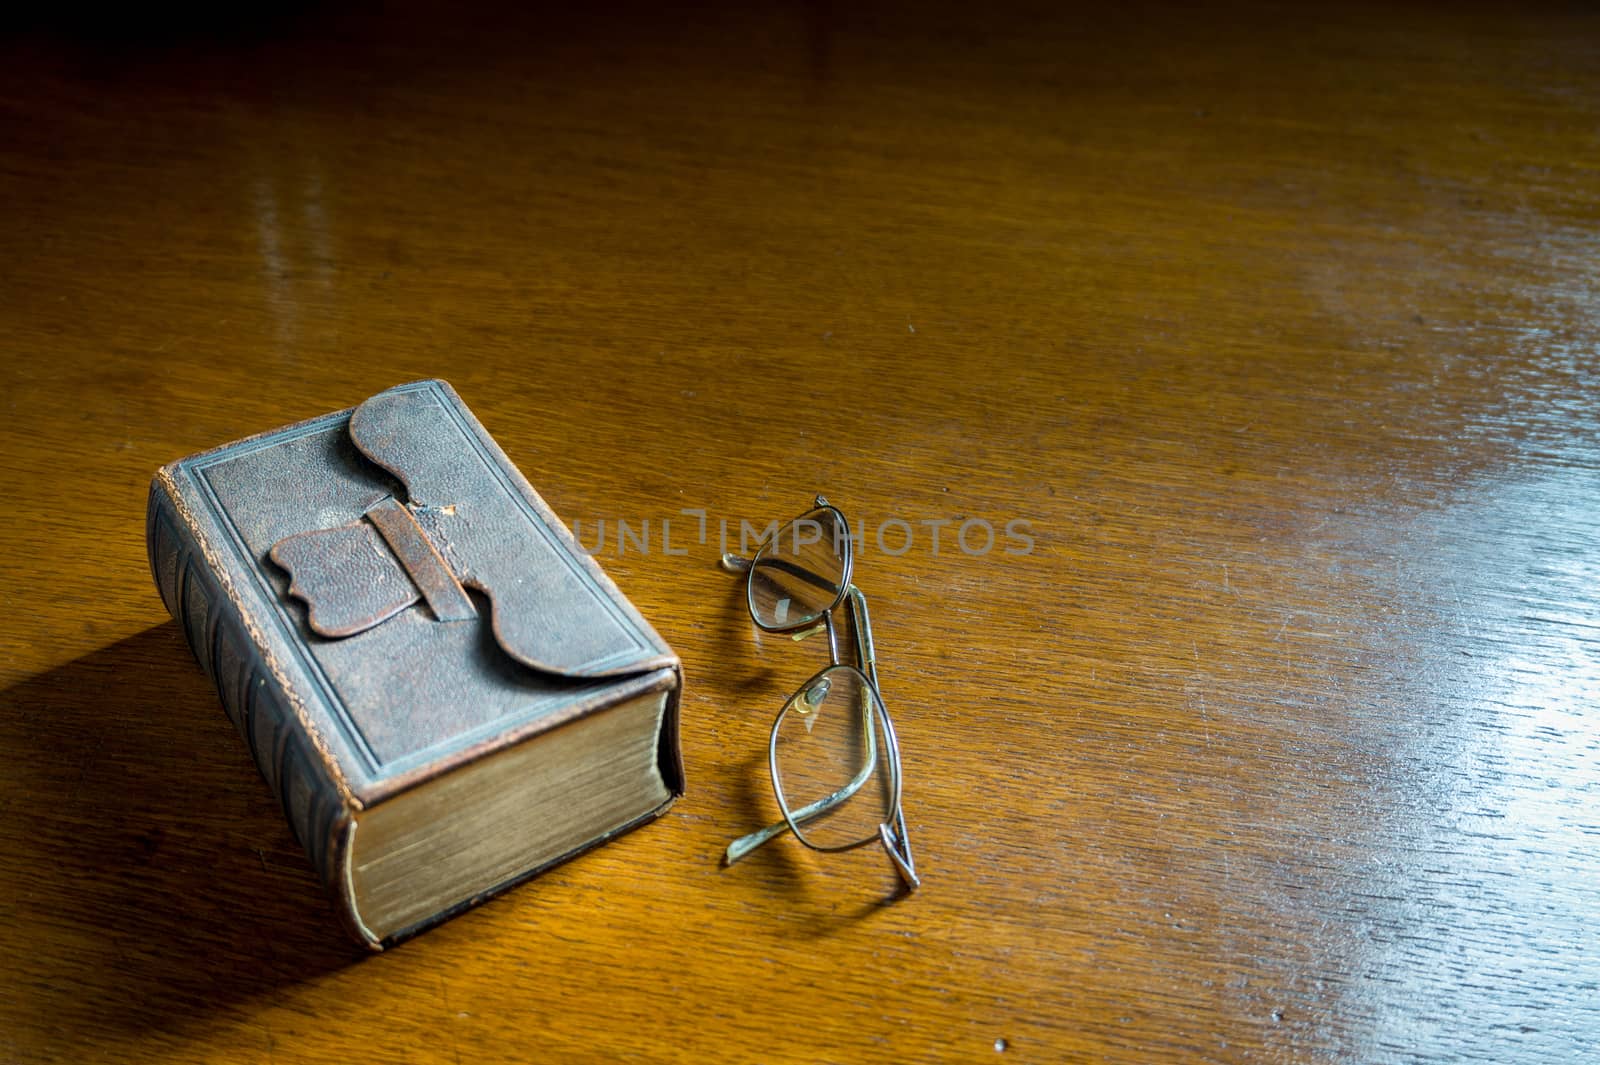 Closed antique 19th century Bible-Songbook with Glasses on a wooden table